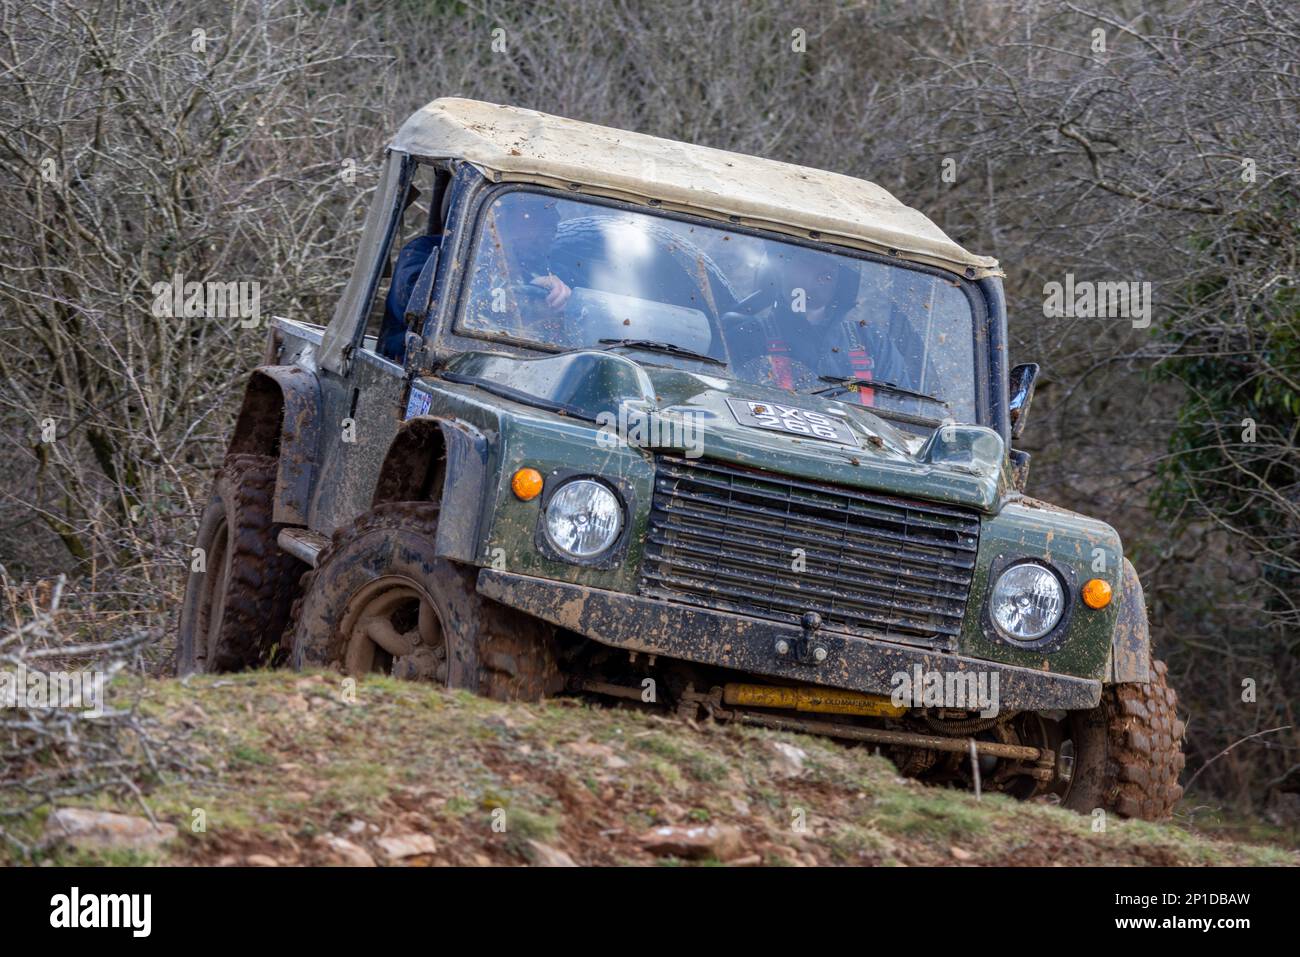 February 2023 - Land Rover Defender 90 taking part in an ADWC off road trial  at Chewton Mendip in Somerset, UK Stock Photo - Alamy